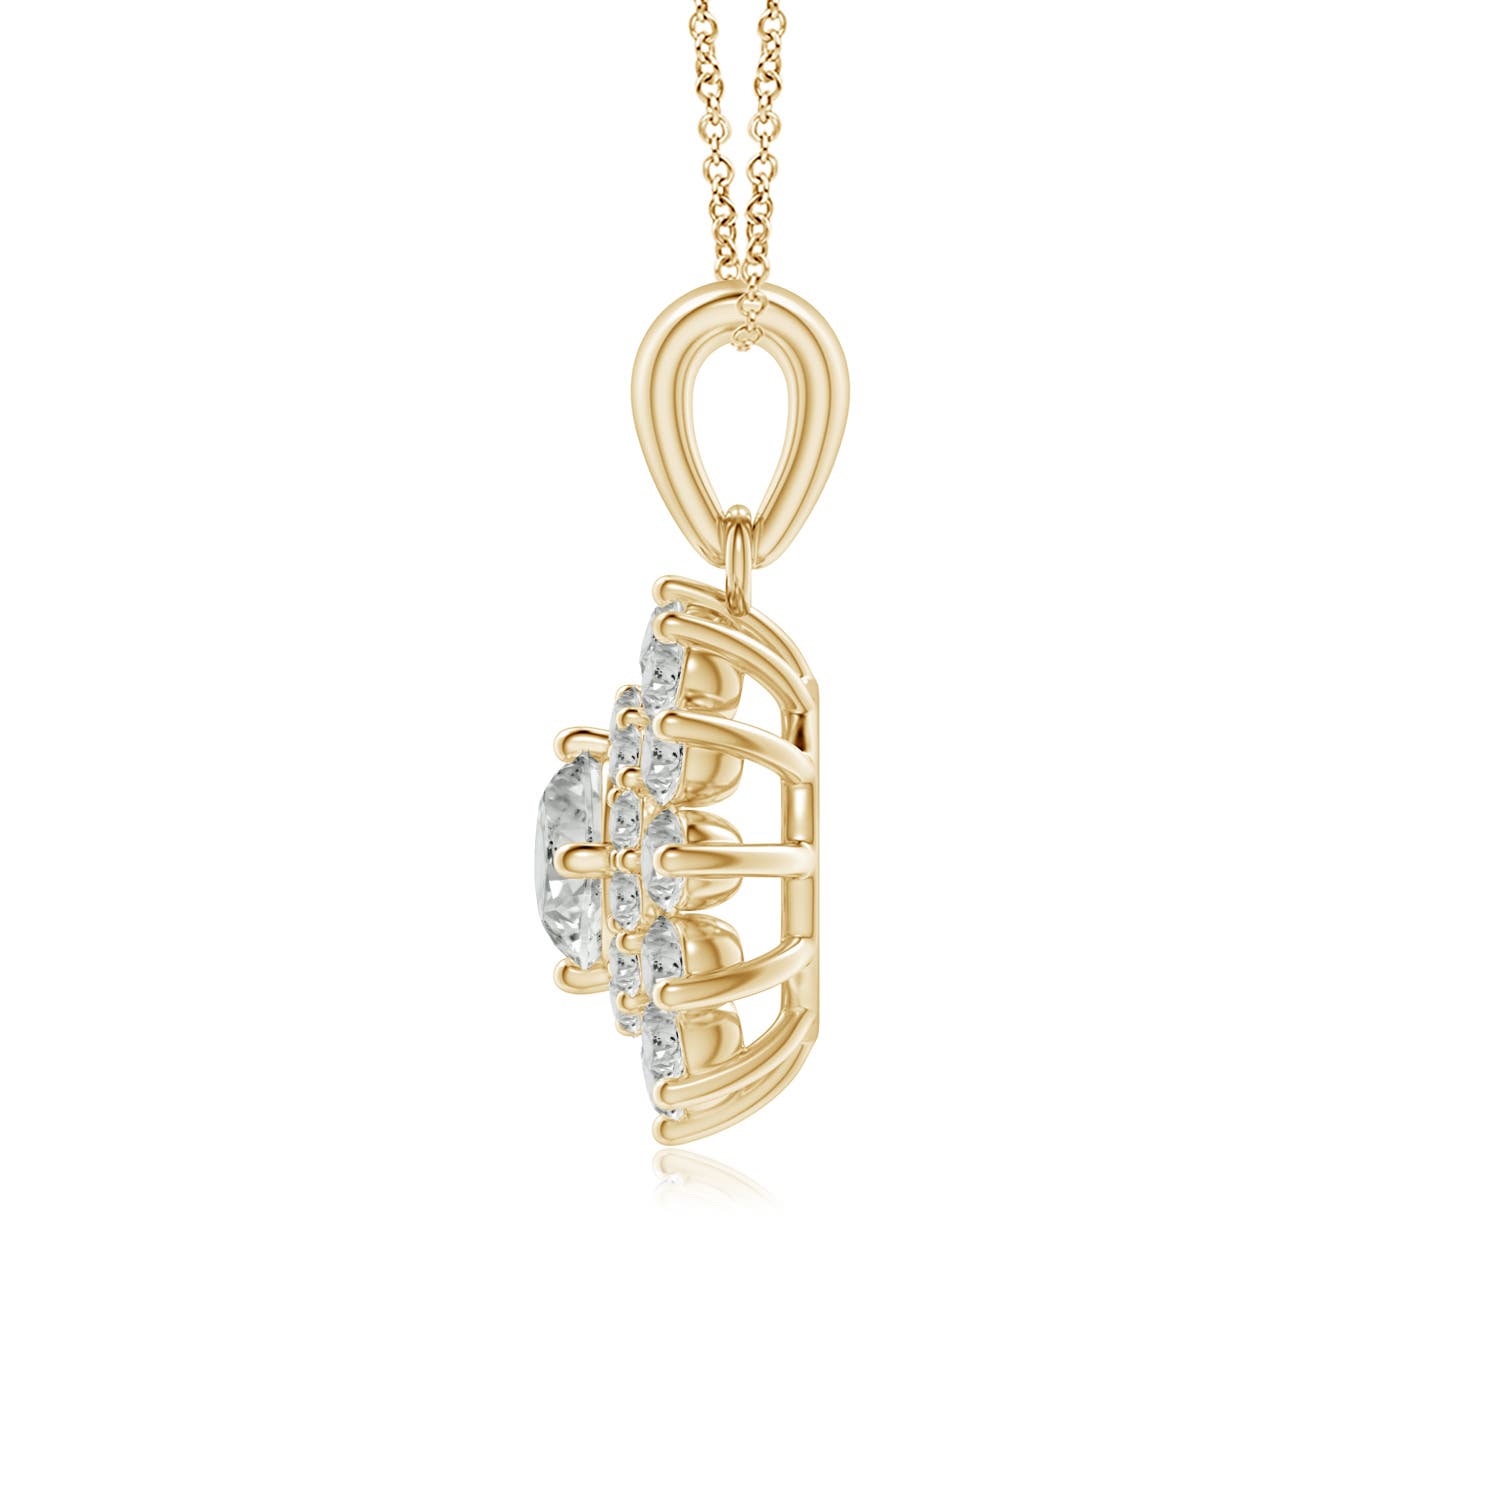 K, I3 / 1.18 CT / 14 KT Yellow Gold